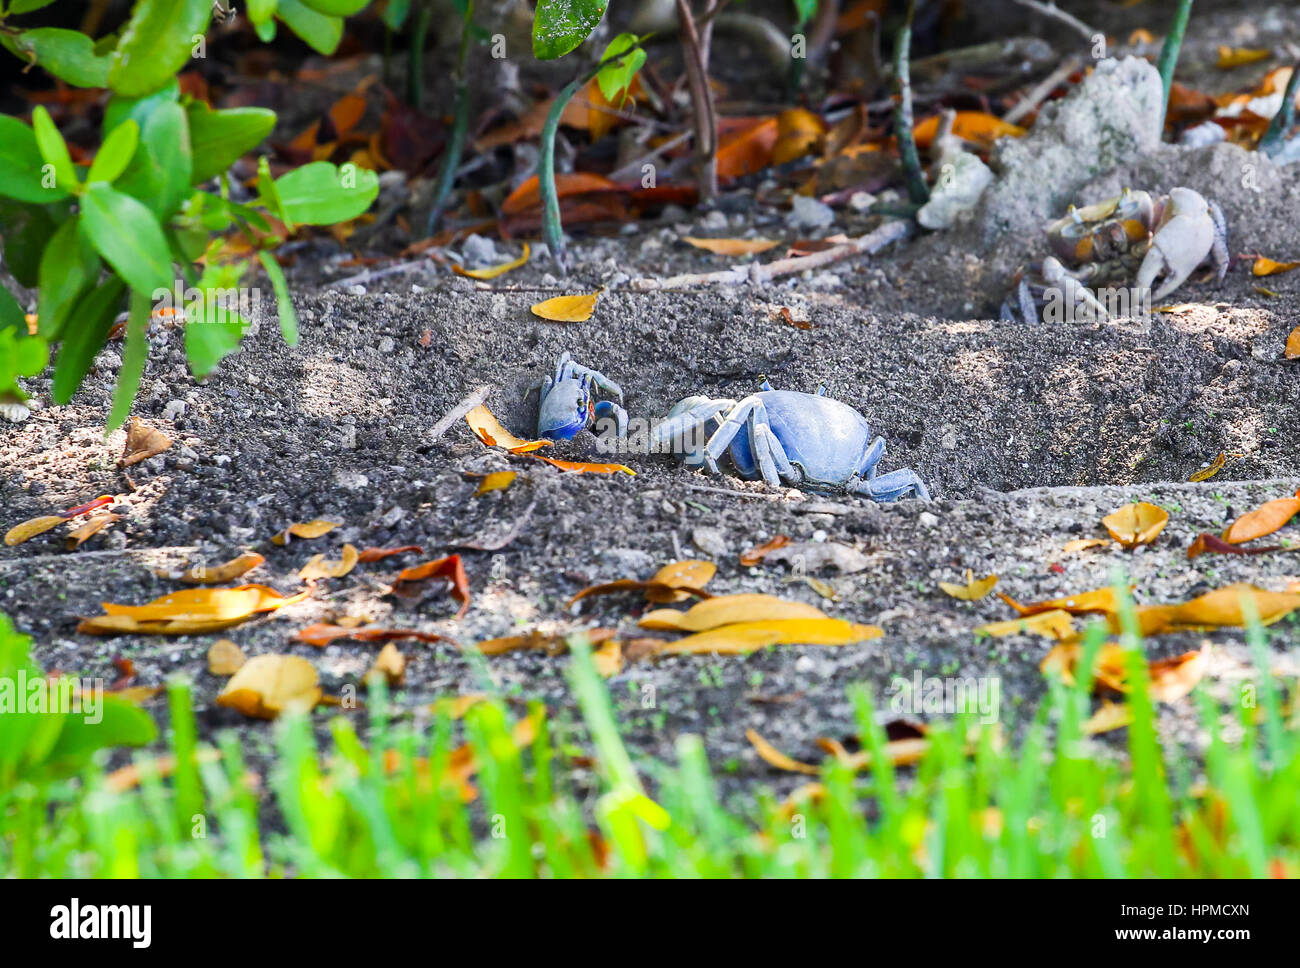 Blue land crabs digging in the soil and guarding their burrows in Key West, Florida, USA Stock Photo